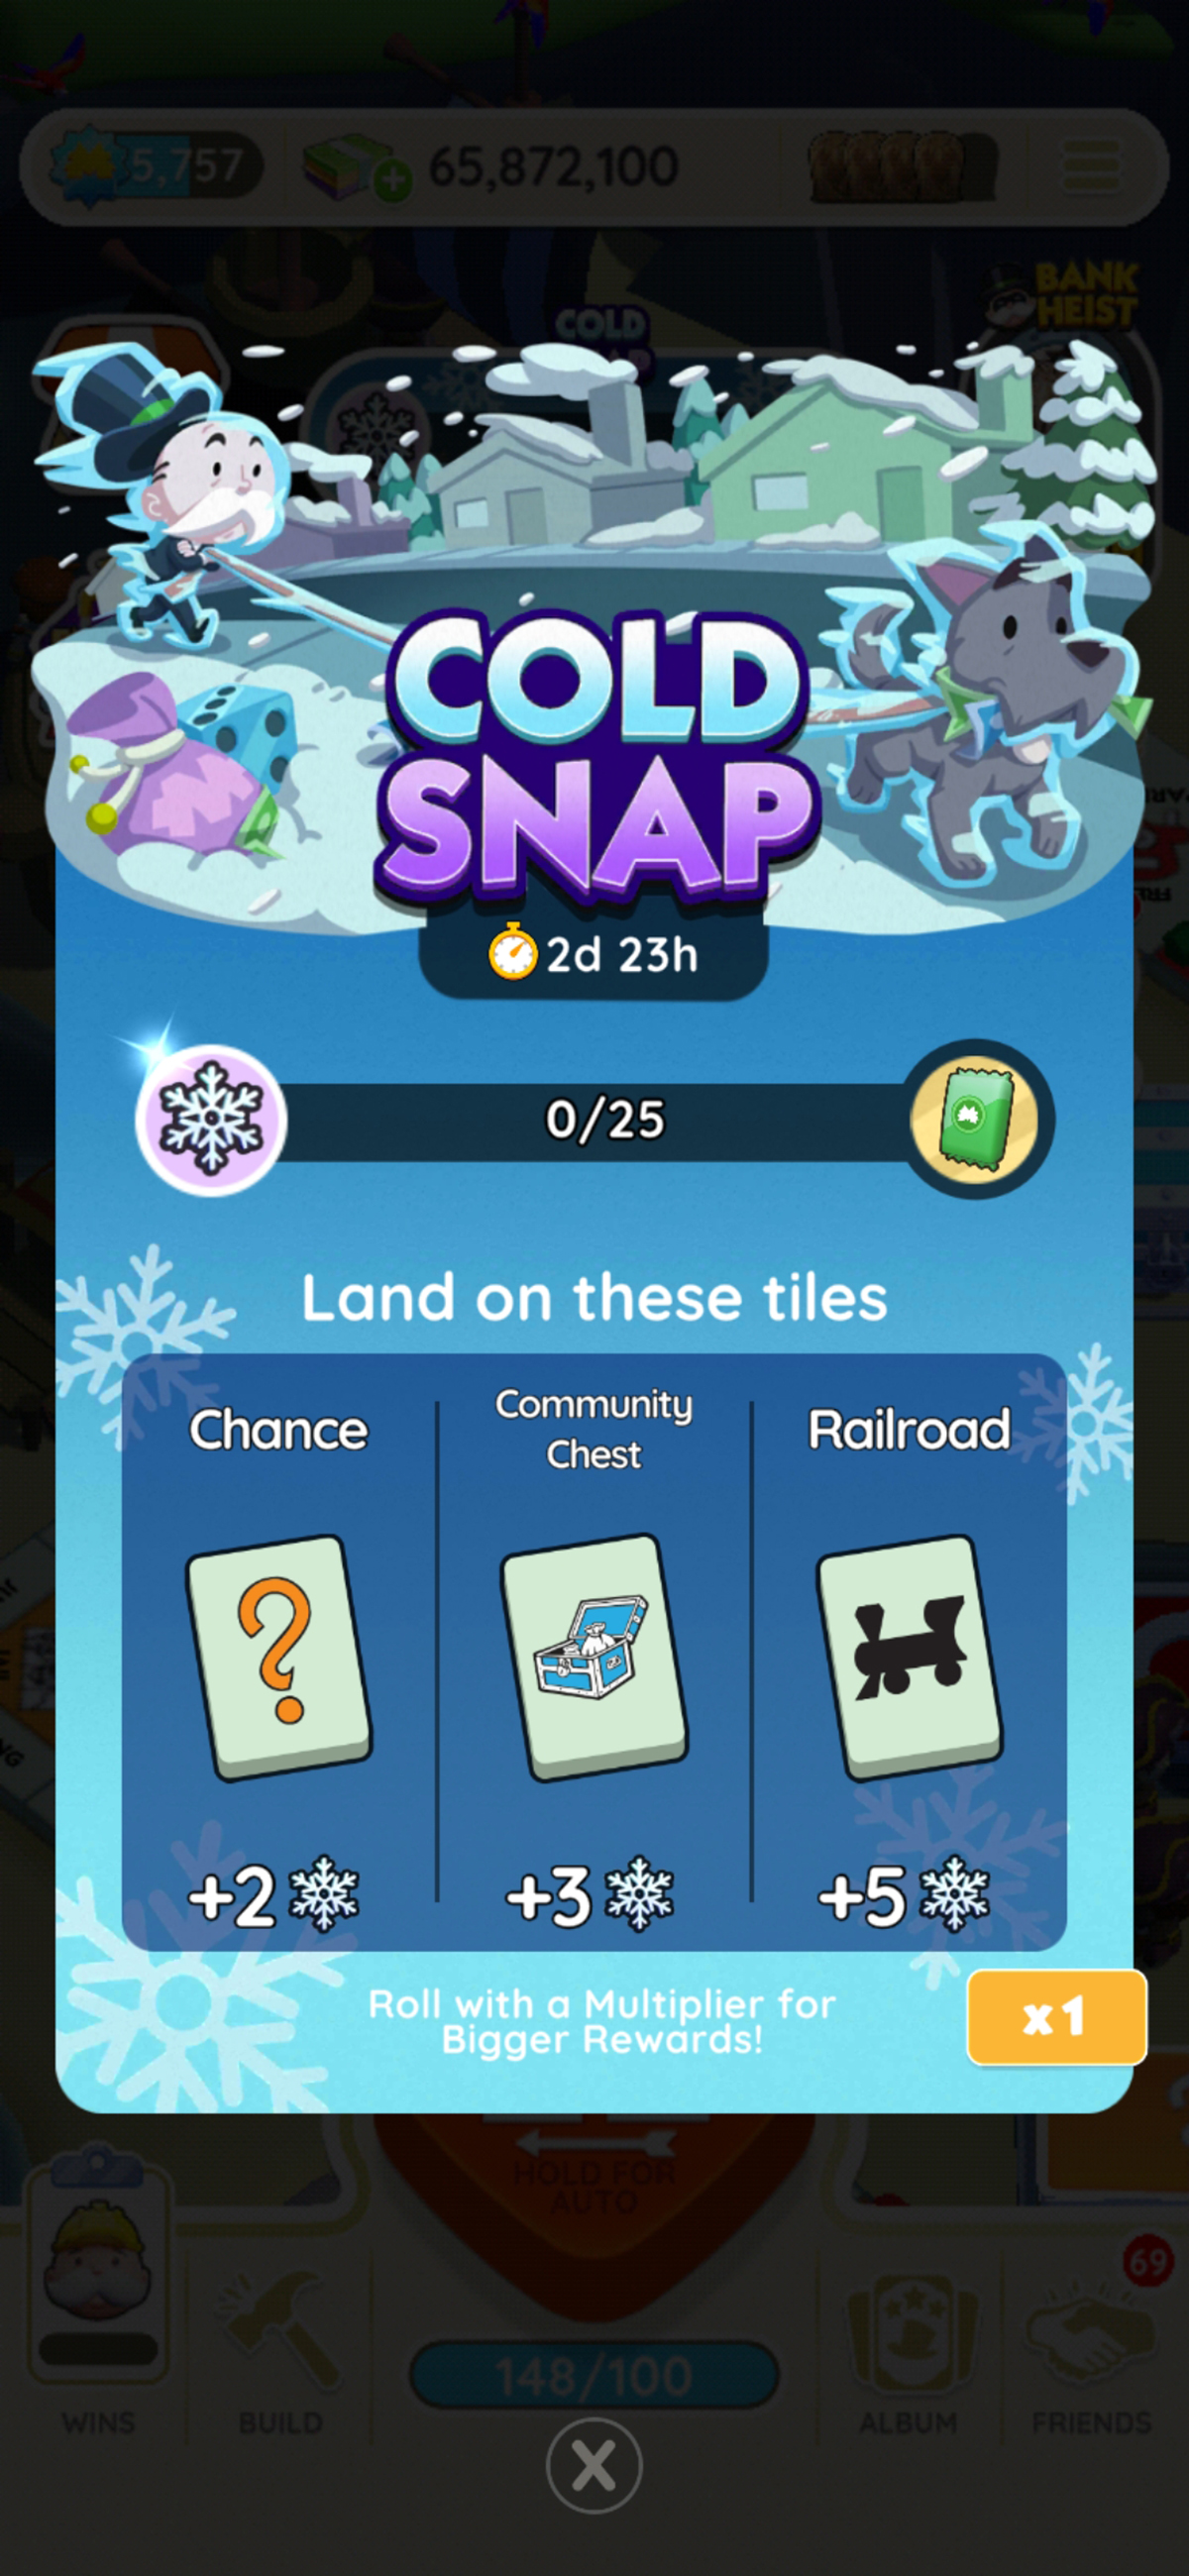 An image for the Cold Snap event in Monopoly GO showing a frozen Mr. Monopoly taking his frozen dog for a walk in a snow storm. The image is part of an article on all the rewards and prizes you can get for hitting the milestones for the Cold Snap event in Monopoly GO.